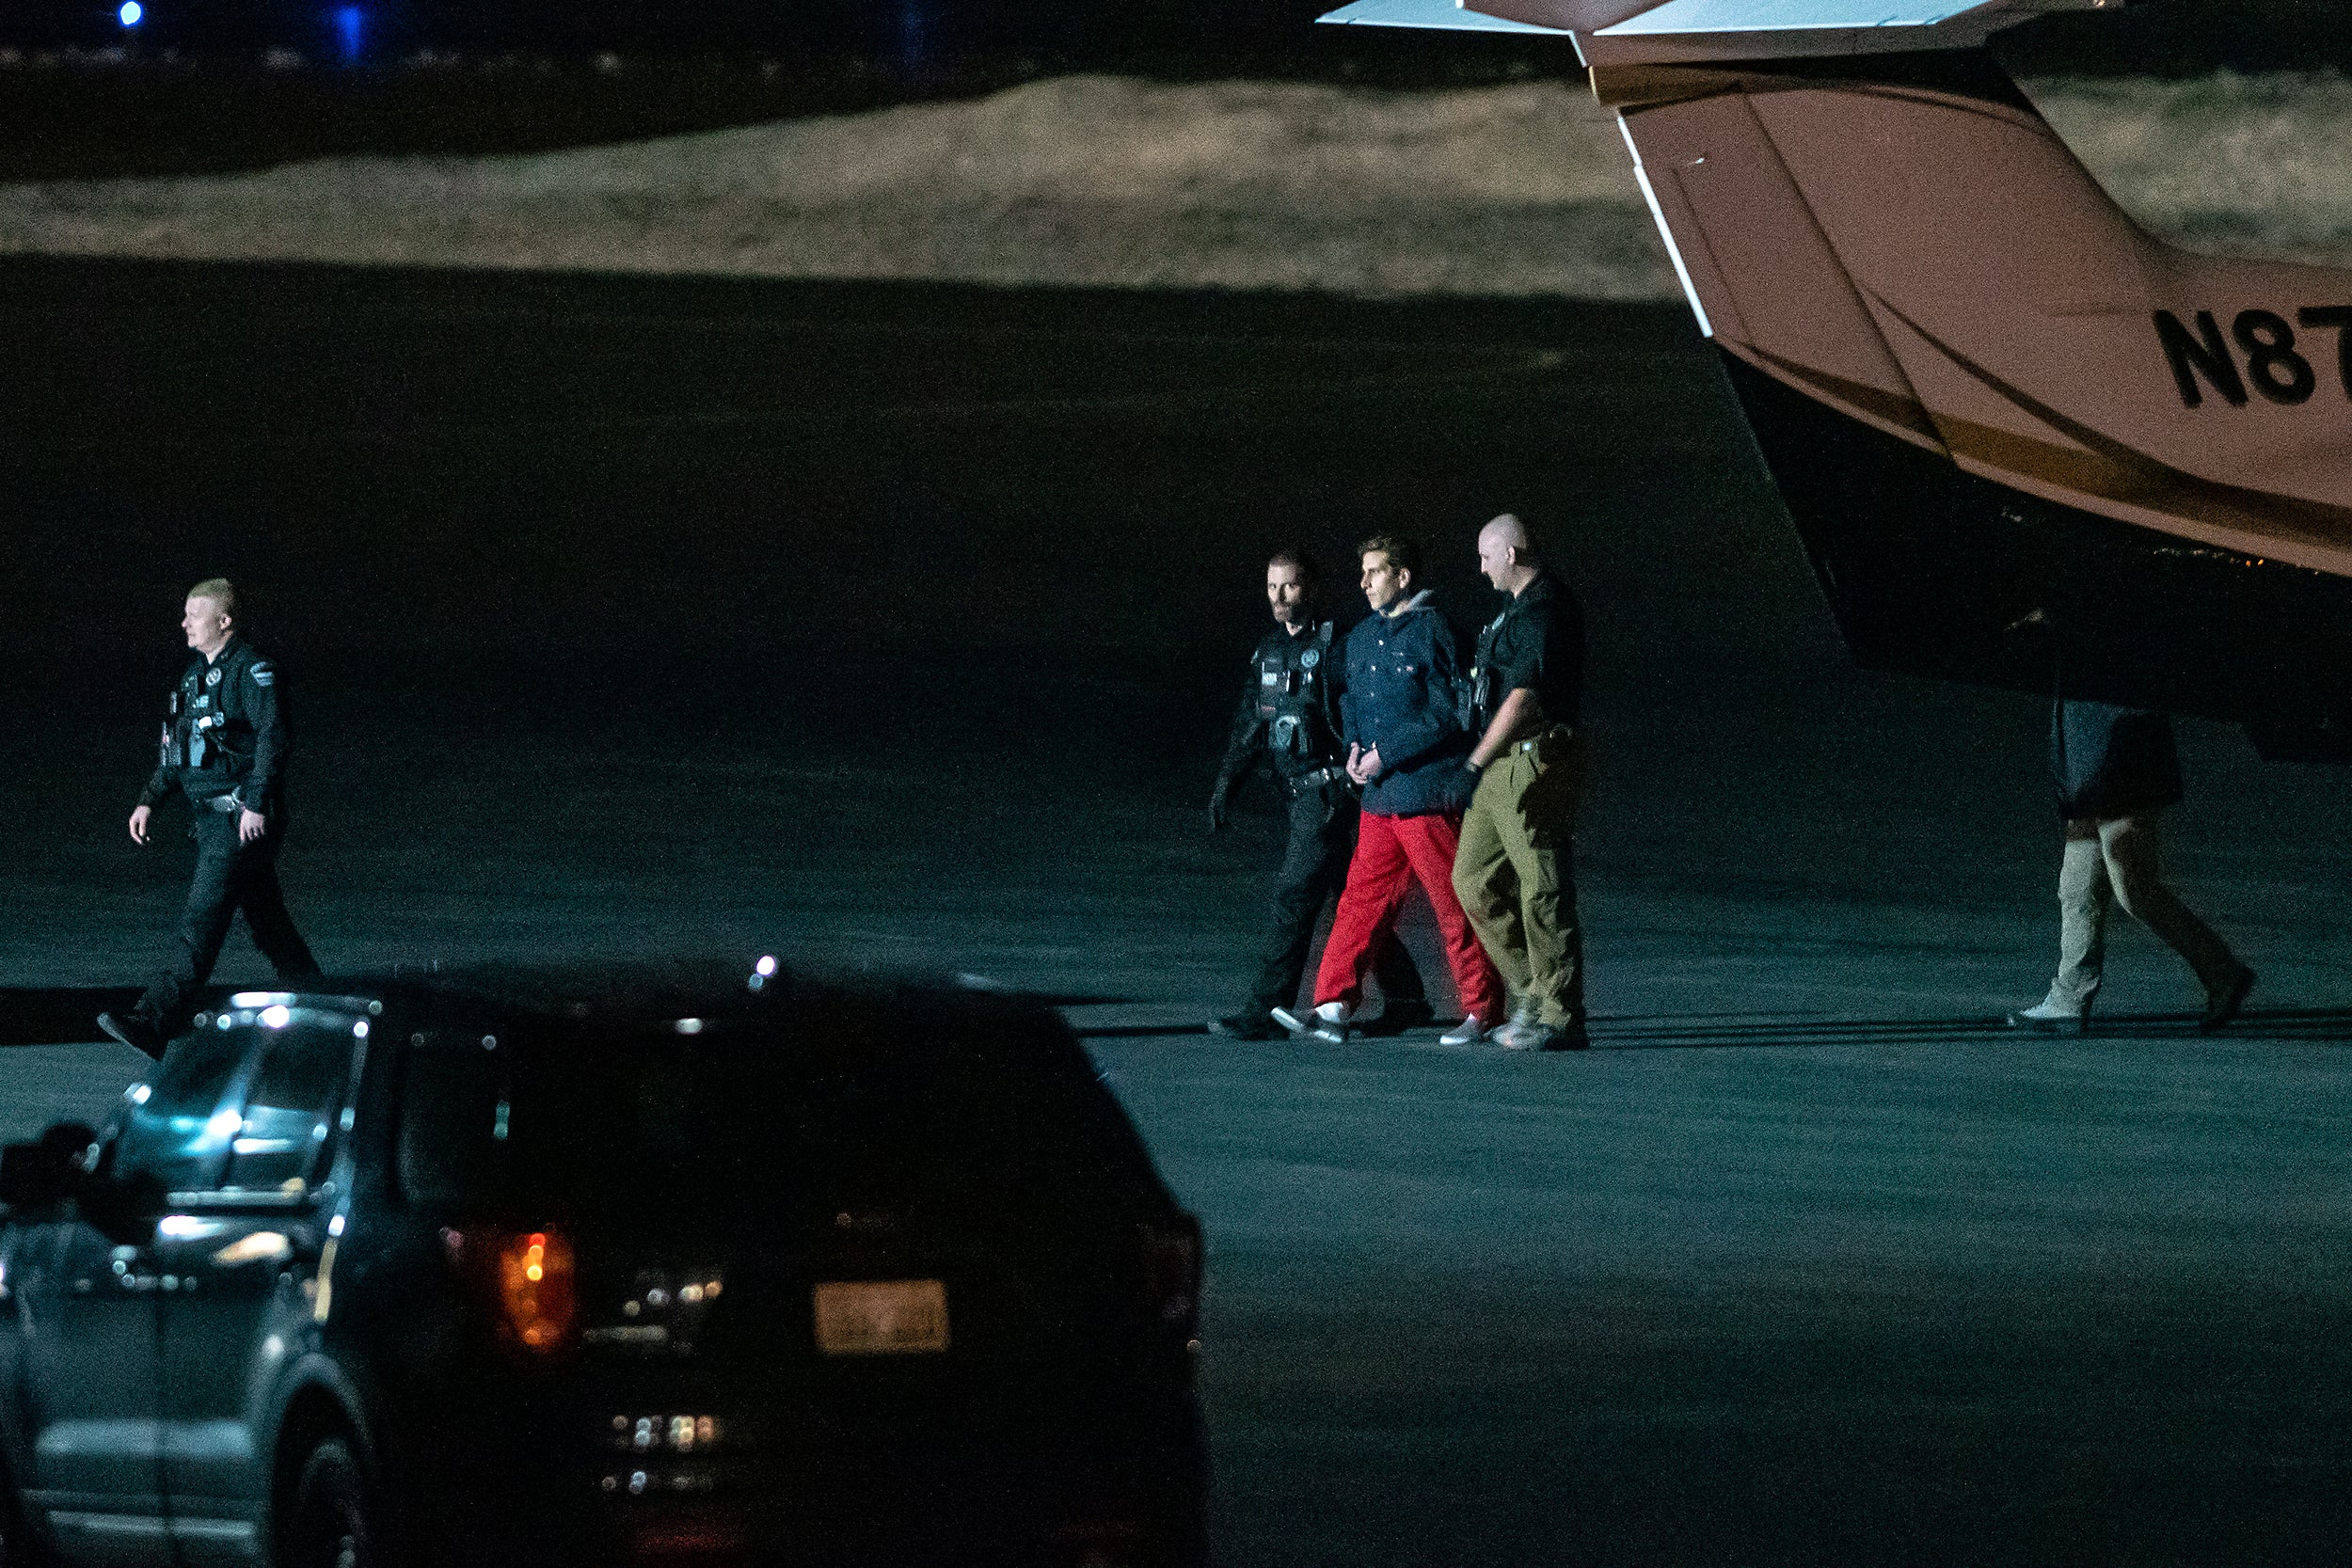 Bryan Kohberger led across the tarmac at Pullman Airport following his extradition from Pennsylvania